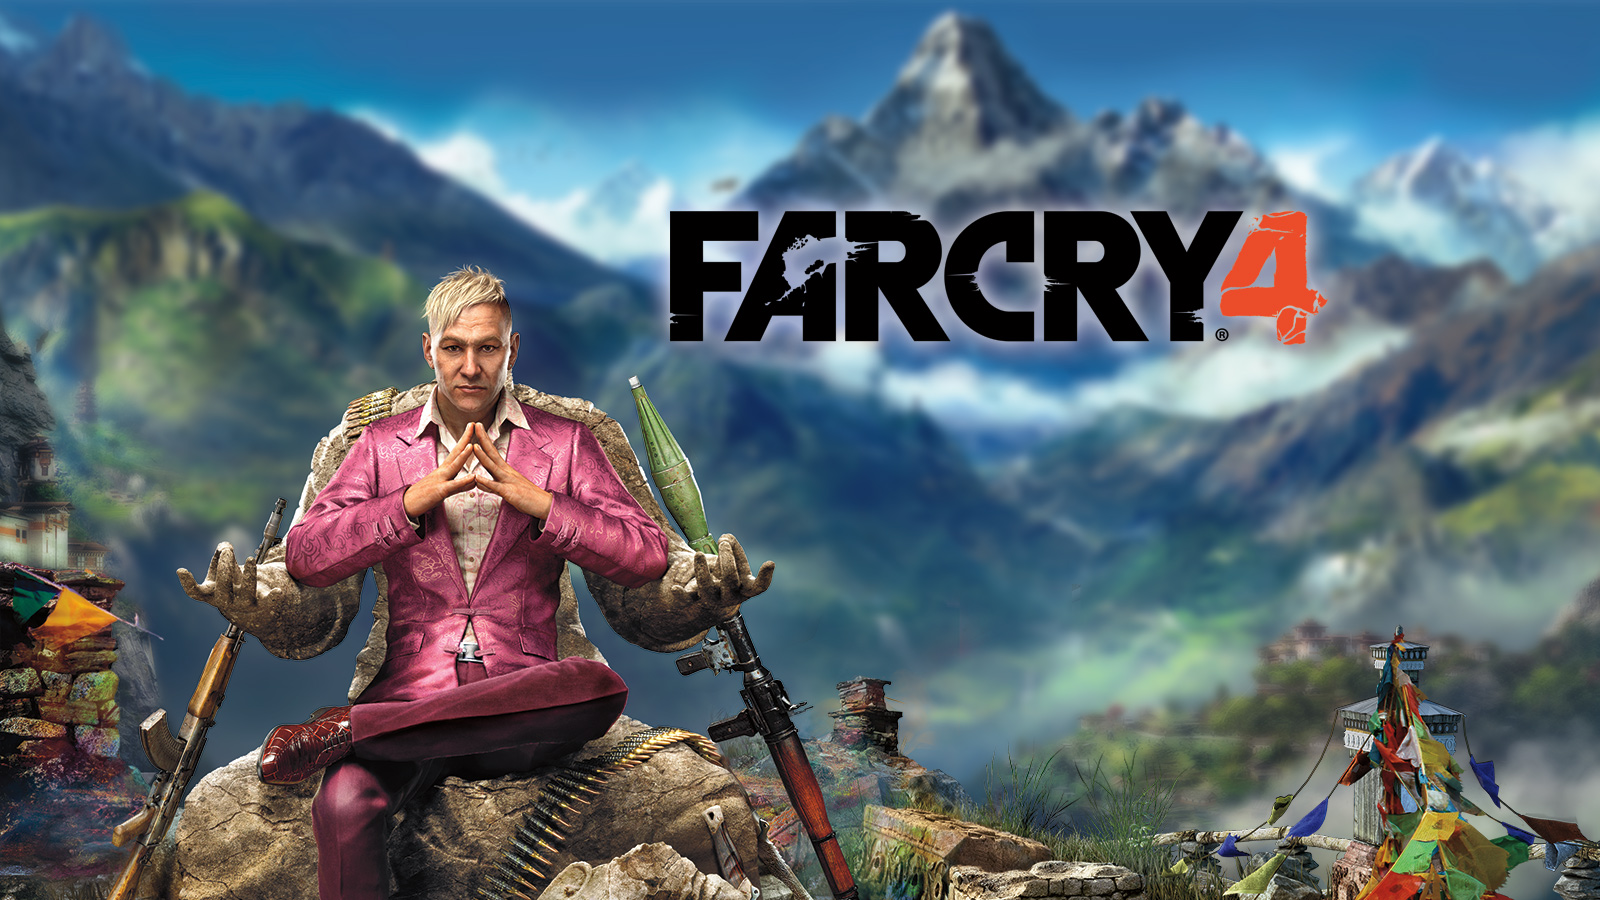 HQ Far Cry Wallpapers | File 2036.42Kb